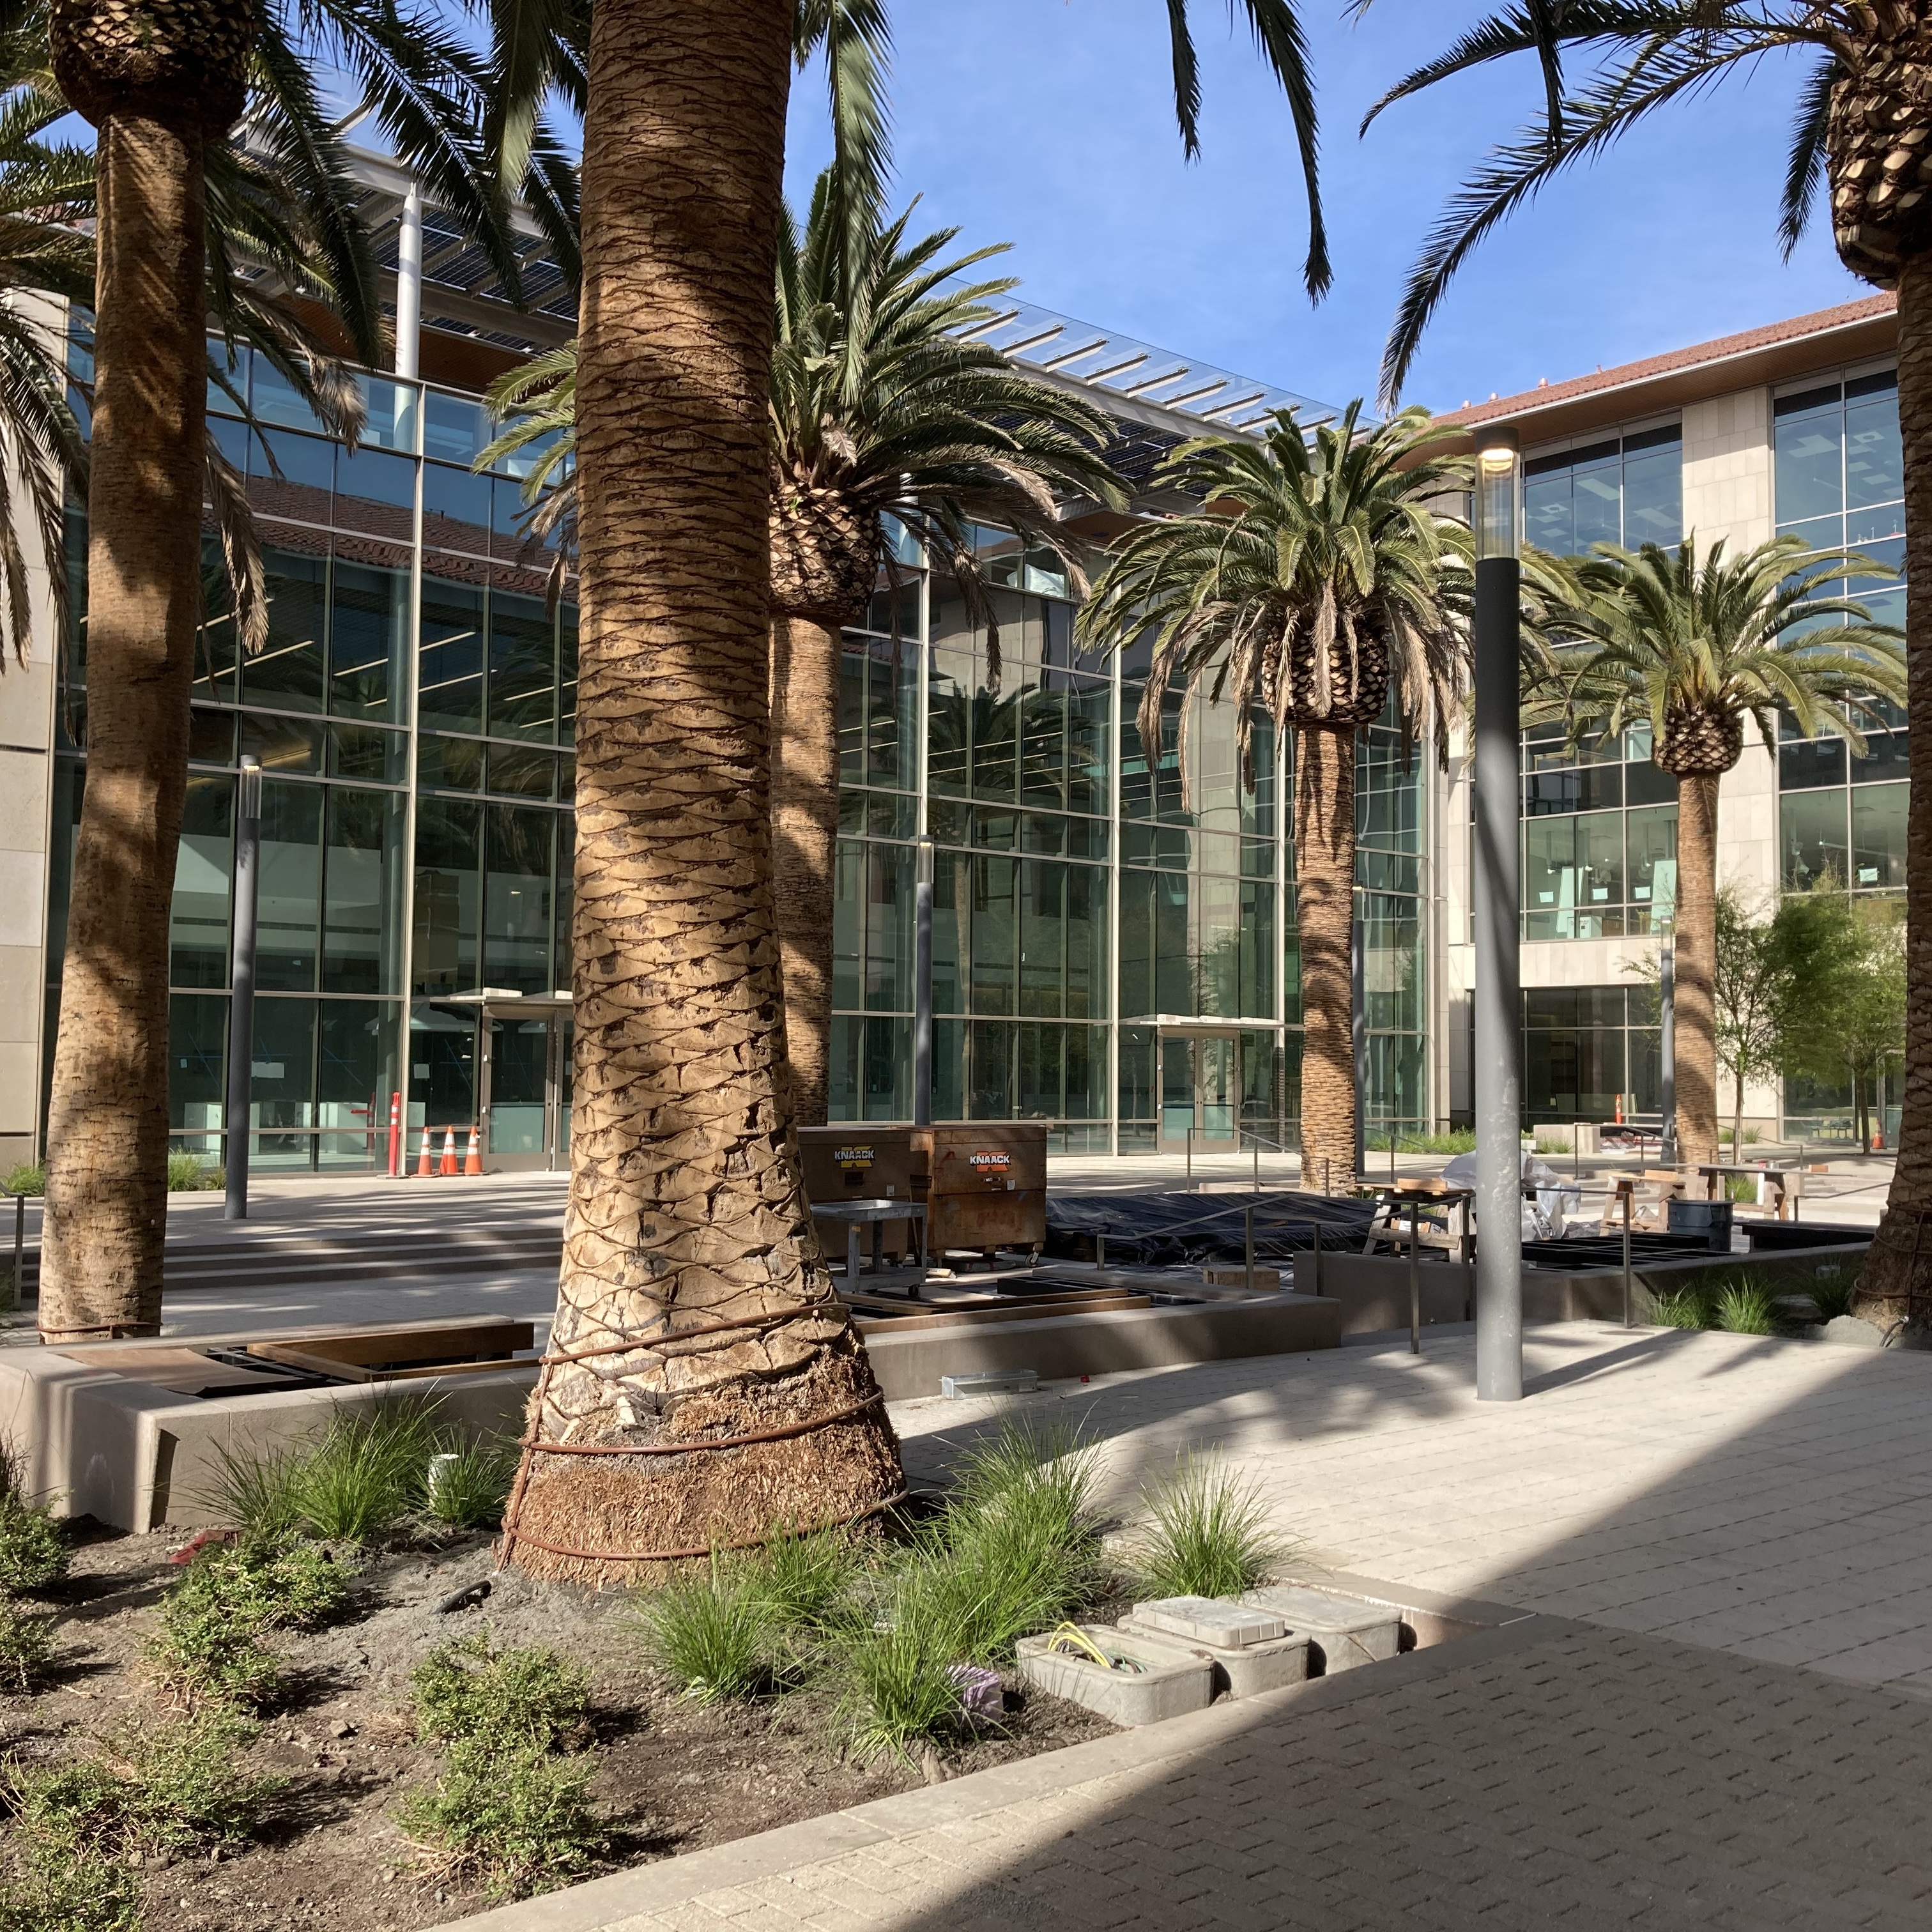 SCDI courtyard under construction but with palm trees planted image link to story